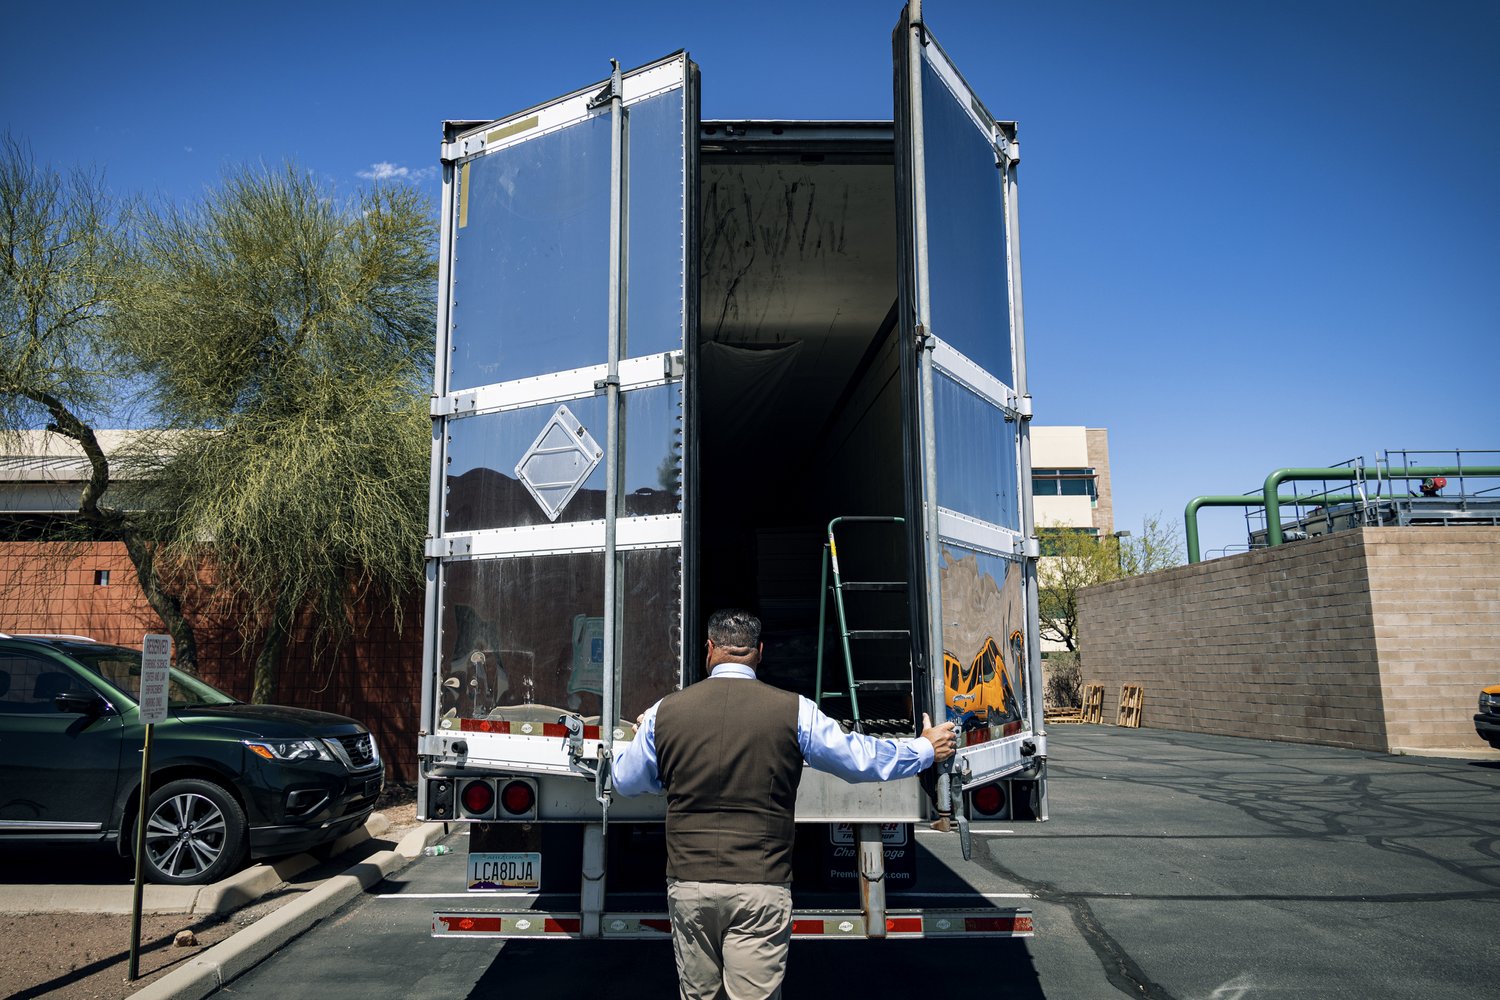 A truck in the parking lot of the Pima County Morgue holds boxes filled with the remains of deceased migrants. © Andrea Godínez